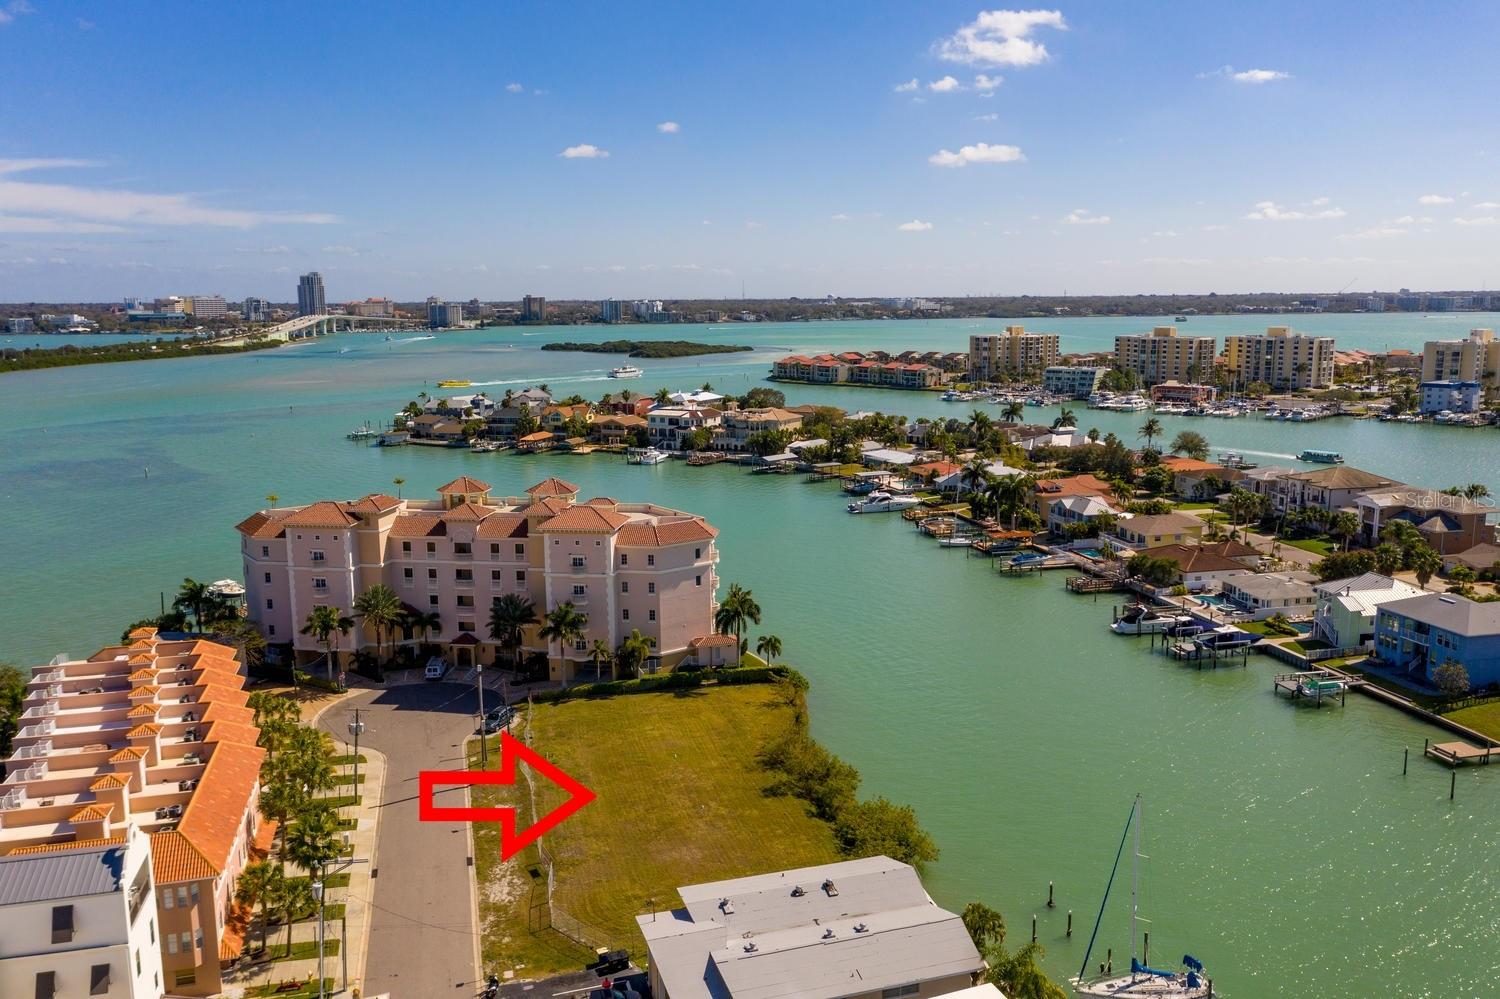 For sale: 00 BRIGHTWATER DRIVE, CLEARWATER BEACH FL 33767, CLEARWATER BEACH, FL